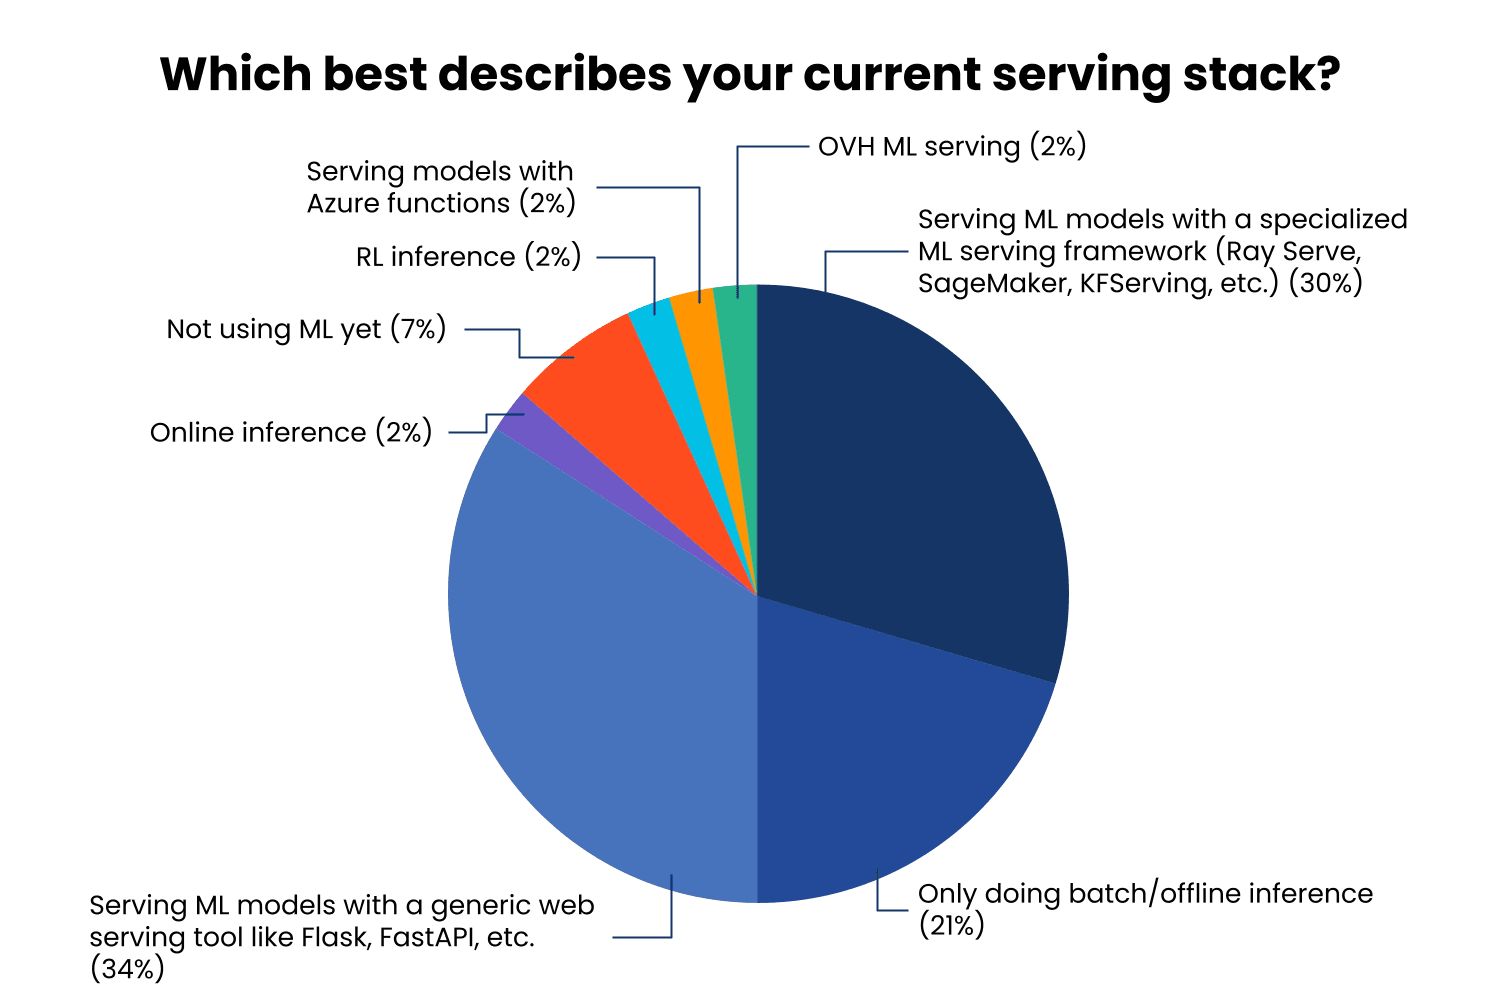 Survey Results from AnyScale